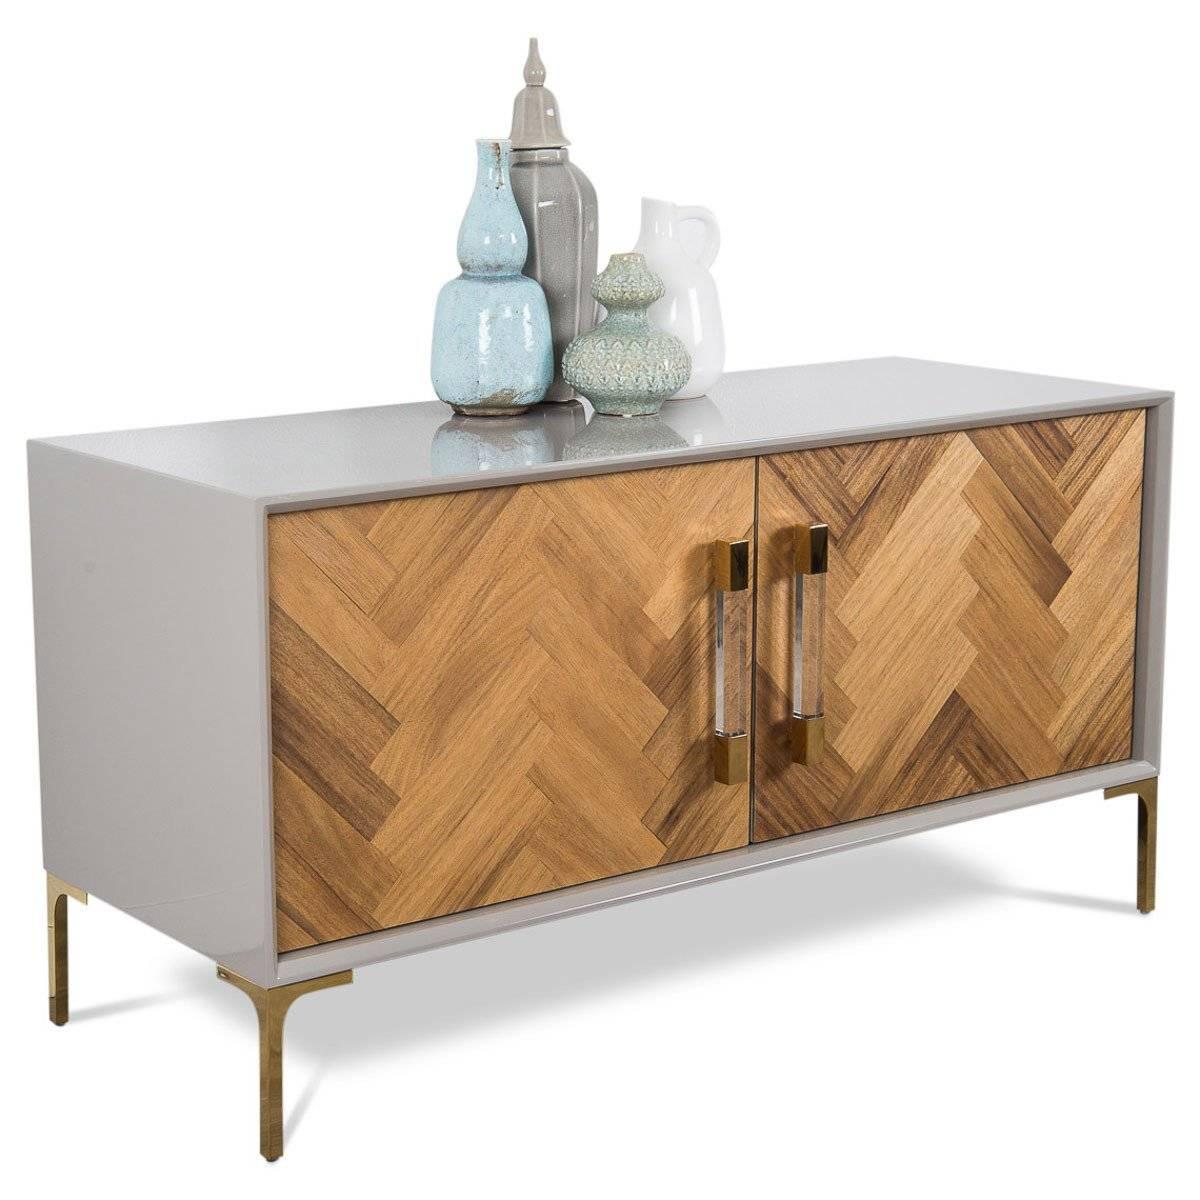 The Amalfi two-door credenza is perfect for any spaces, with oiled South American walnut finished doors. Surrounded by a greystone finish, the wood pieces placed on the doors create a large herringbone effect. The doors are finished off with our